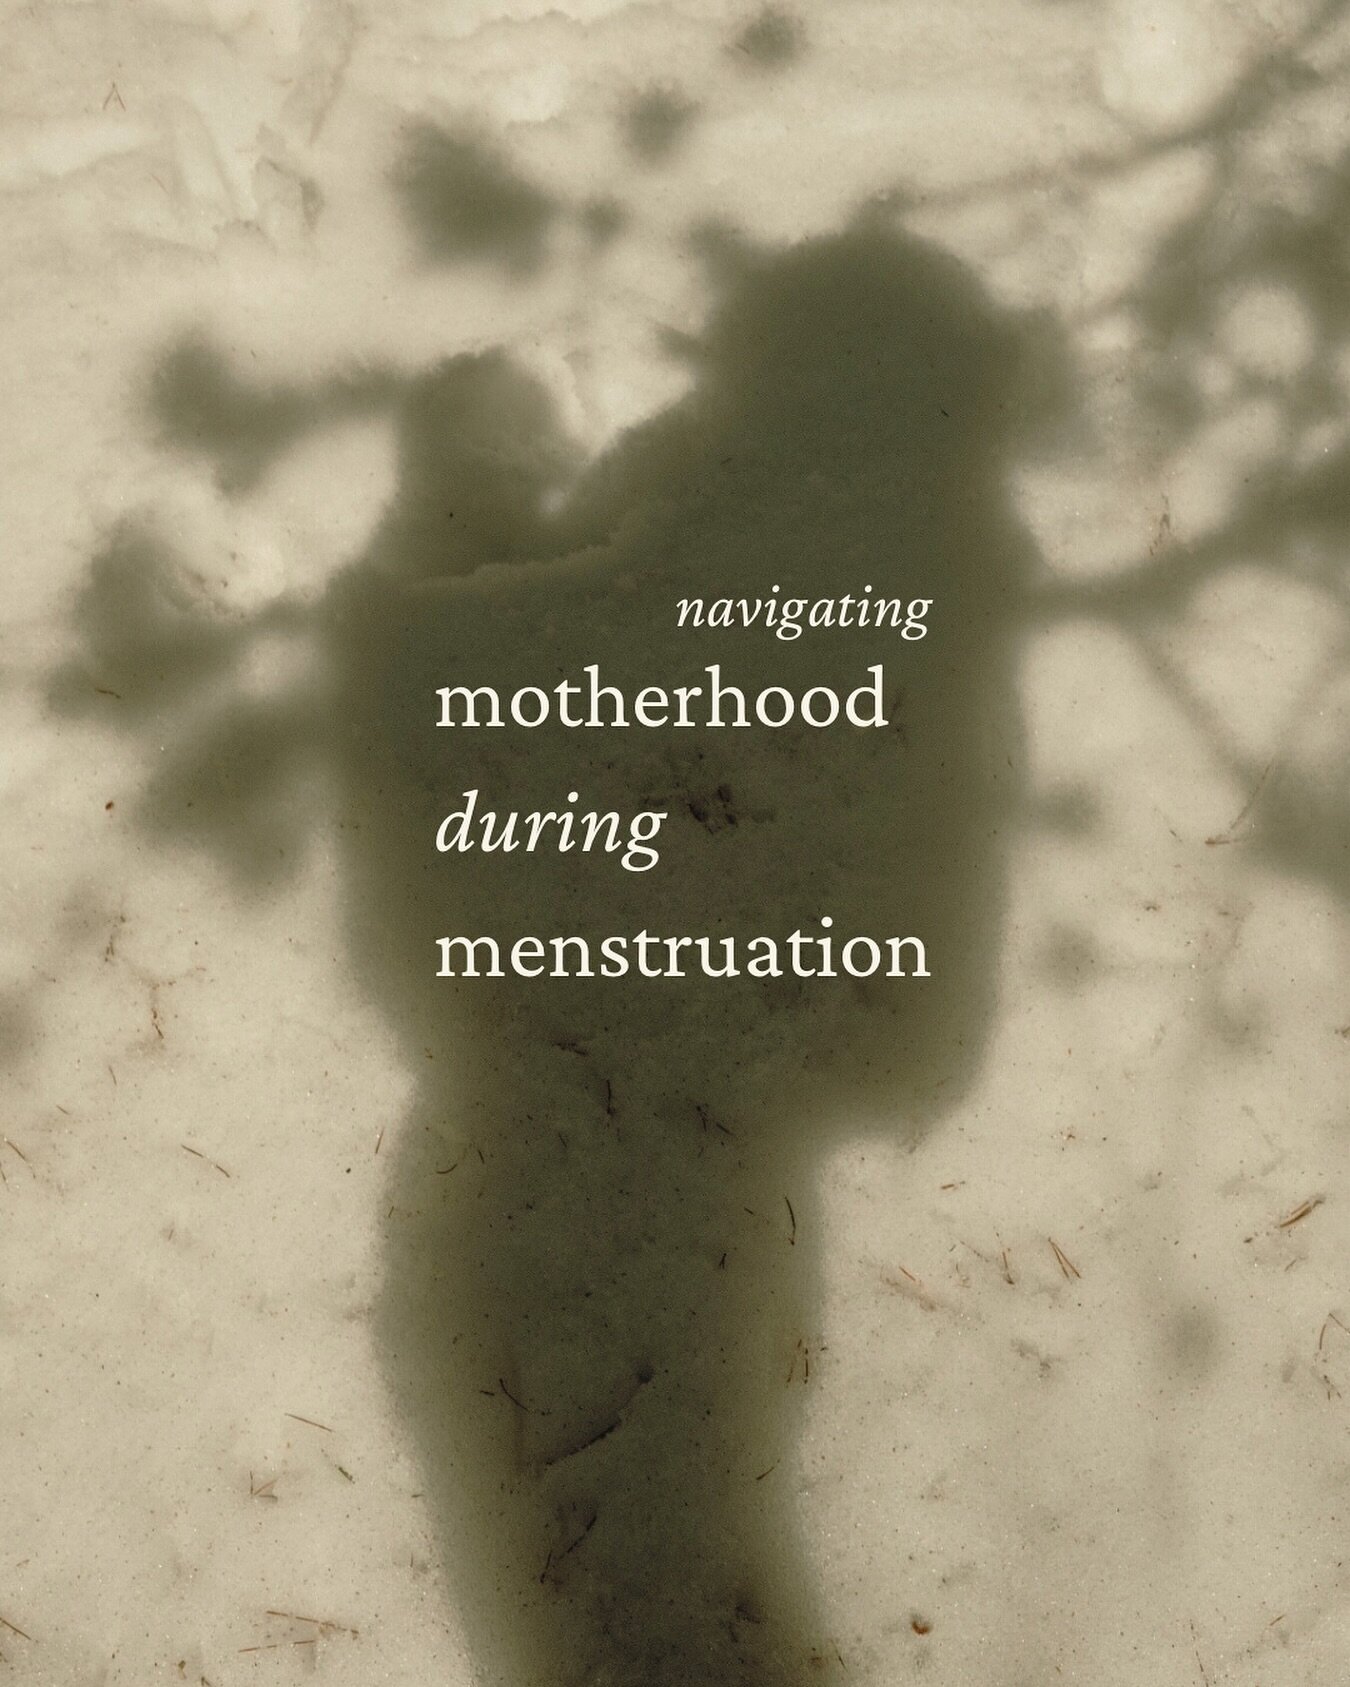 As cycle day 30 slowly turns into cycle day one, I&rsquo;m sitting here, sun beaming through the window giving life to my otherwise sleepy eyes, musing on the difference in experience of menstruation during motherhood.

It shouldn&rsquo;t come as a s